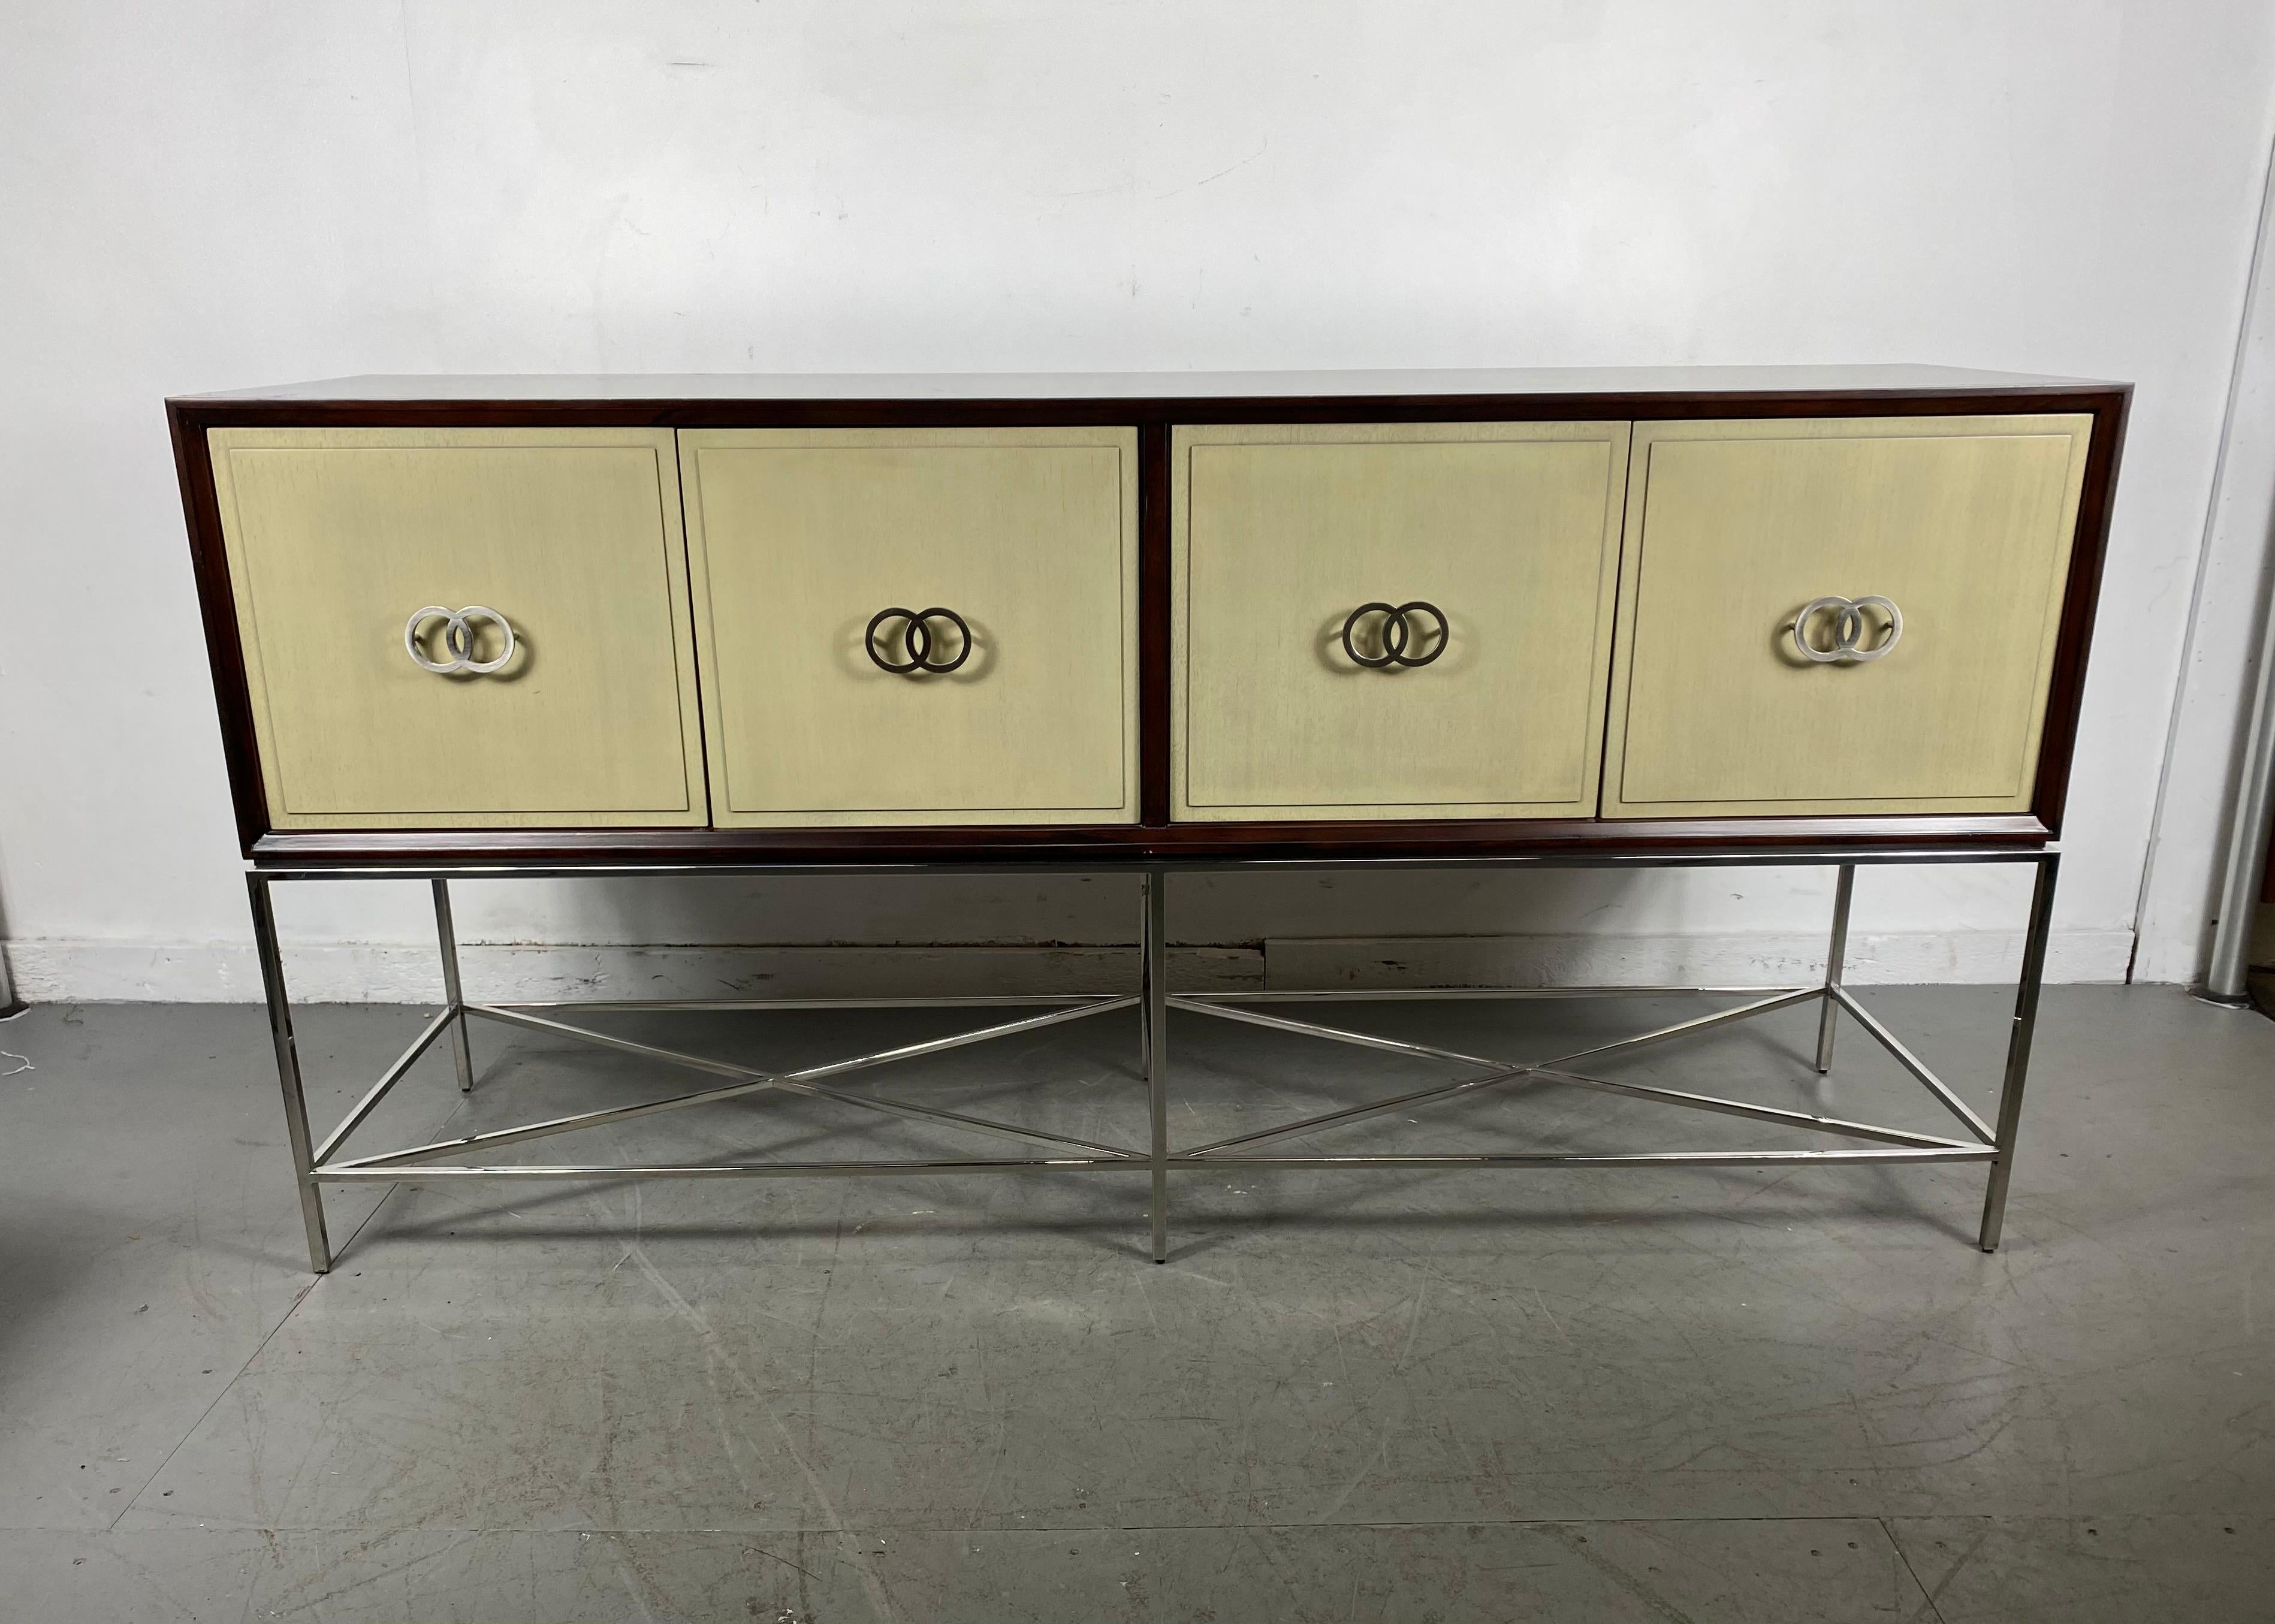 Vanguard furniture Michael Weiss kingsley sideboard / contemporary modernist

Details:

Collection: Michael Weiss
Two glass shelves
Four doors
Hardware: brushed nickel
Materials: African walnut solids and veneers ,,,,,,,,,,,,,,,,,,,,, hand